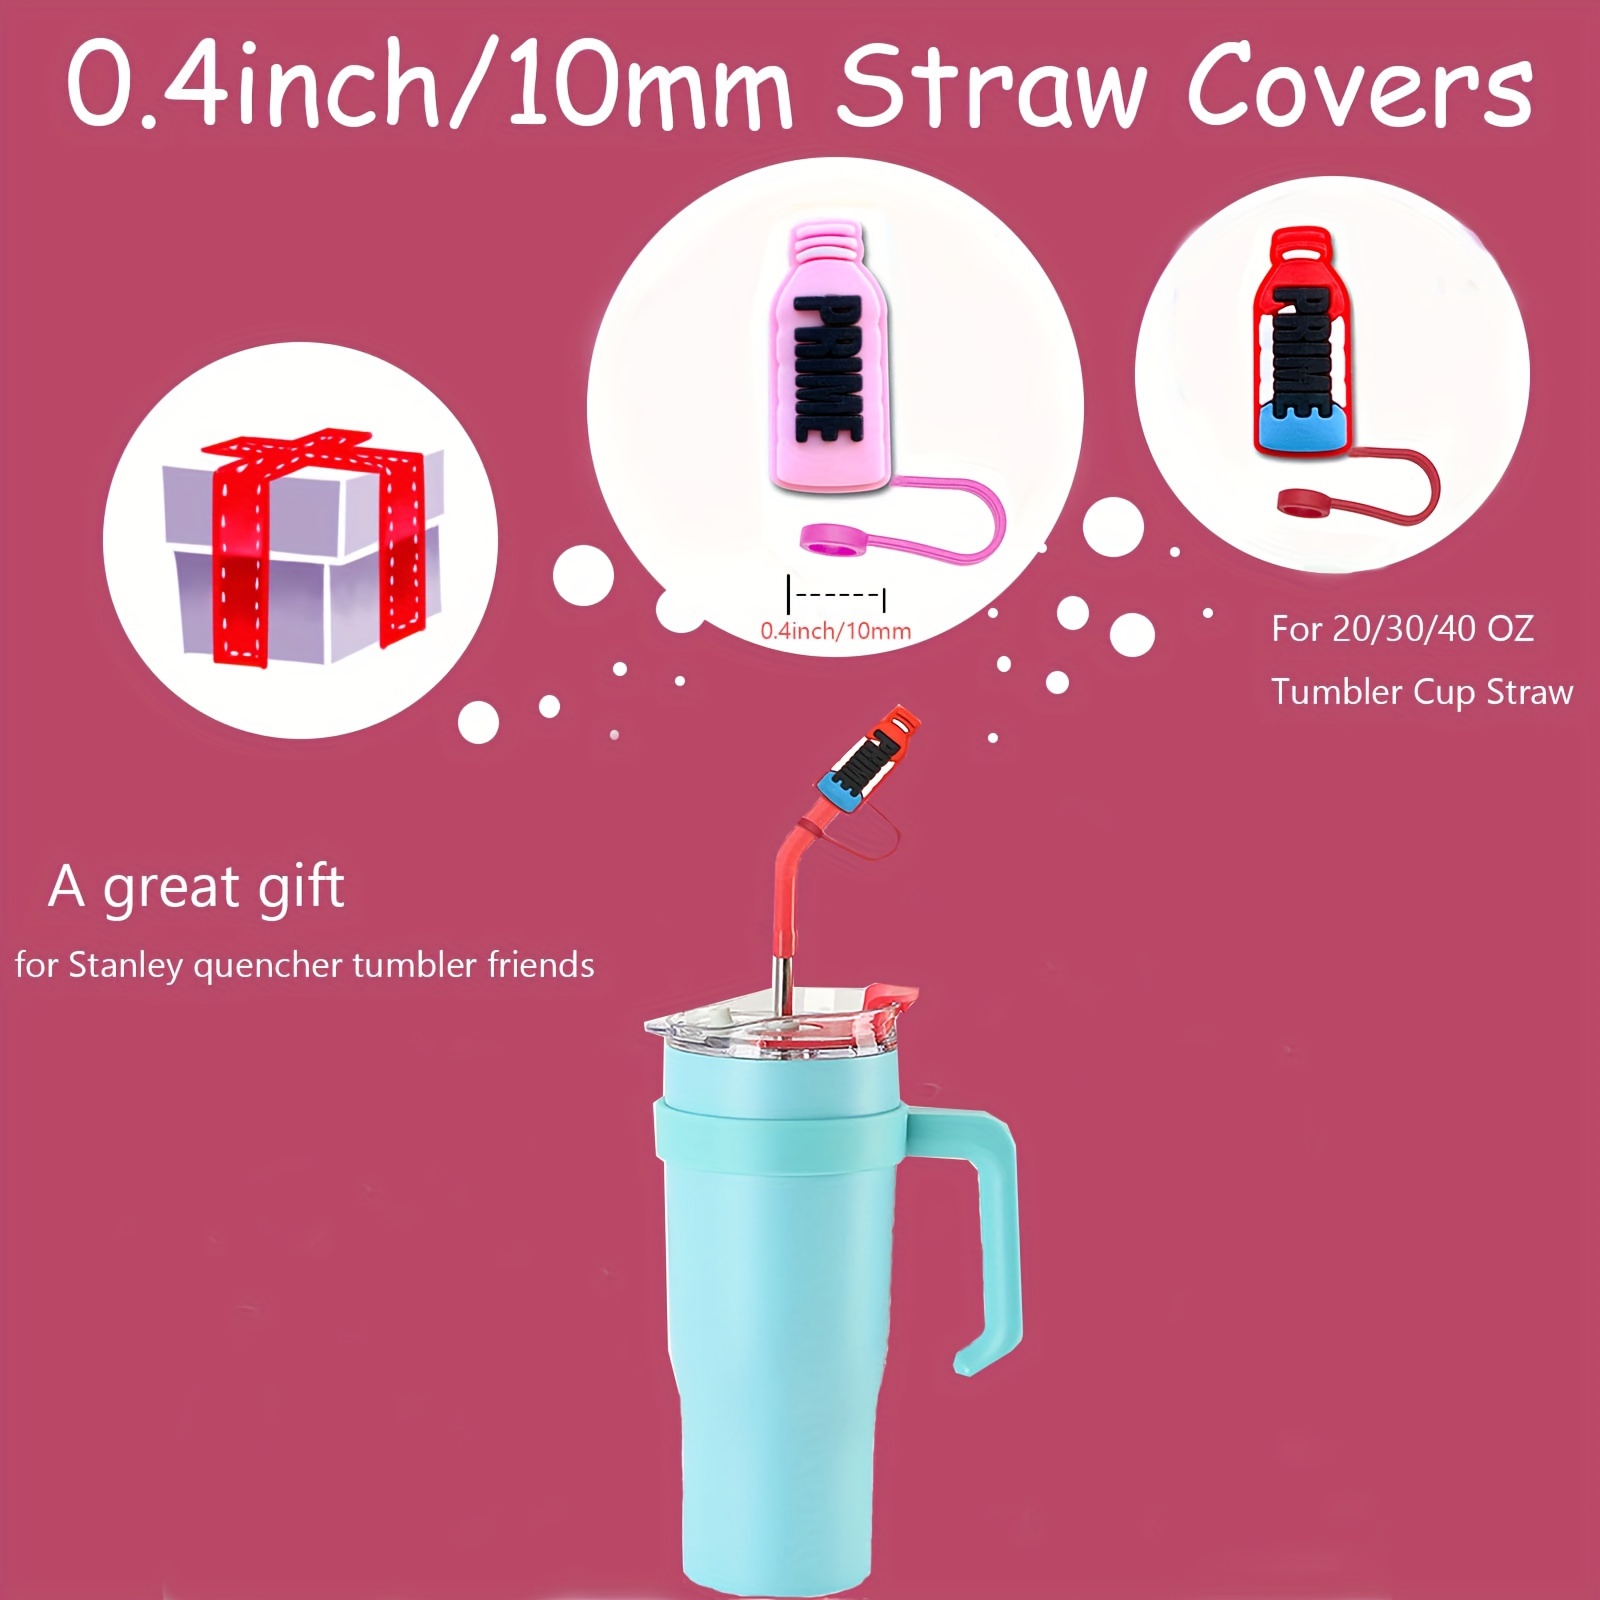 8 Pcs] Straw Cover Topper for Stanley - 10mm Silicone Straw Cap